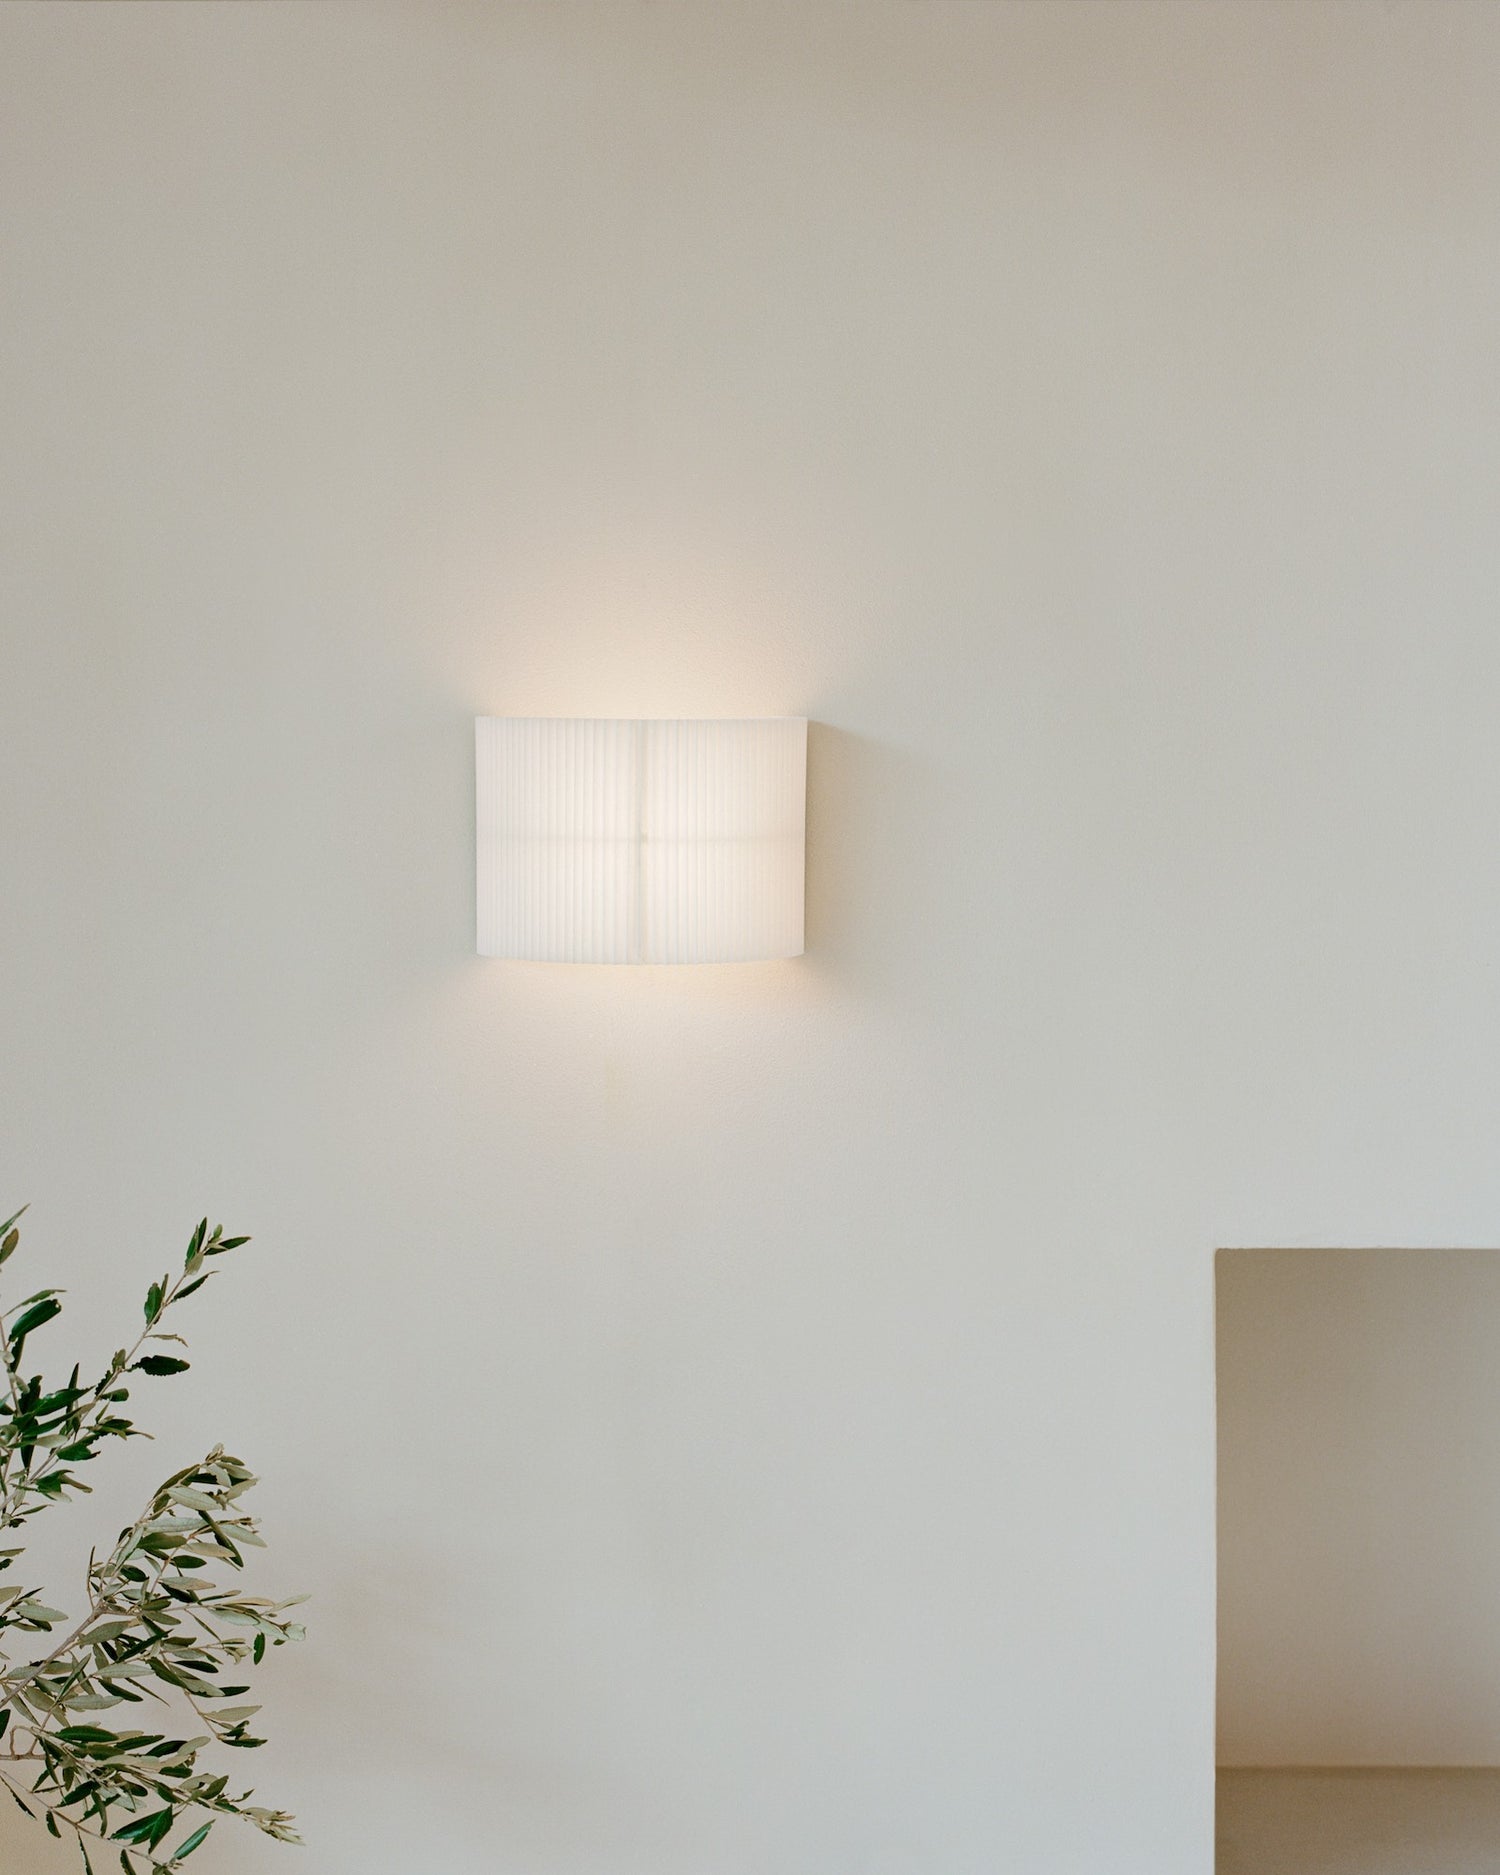 Nebra Wall Lamp by New Works, on ceiling with shade straight